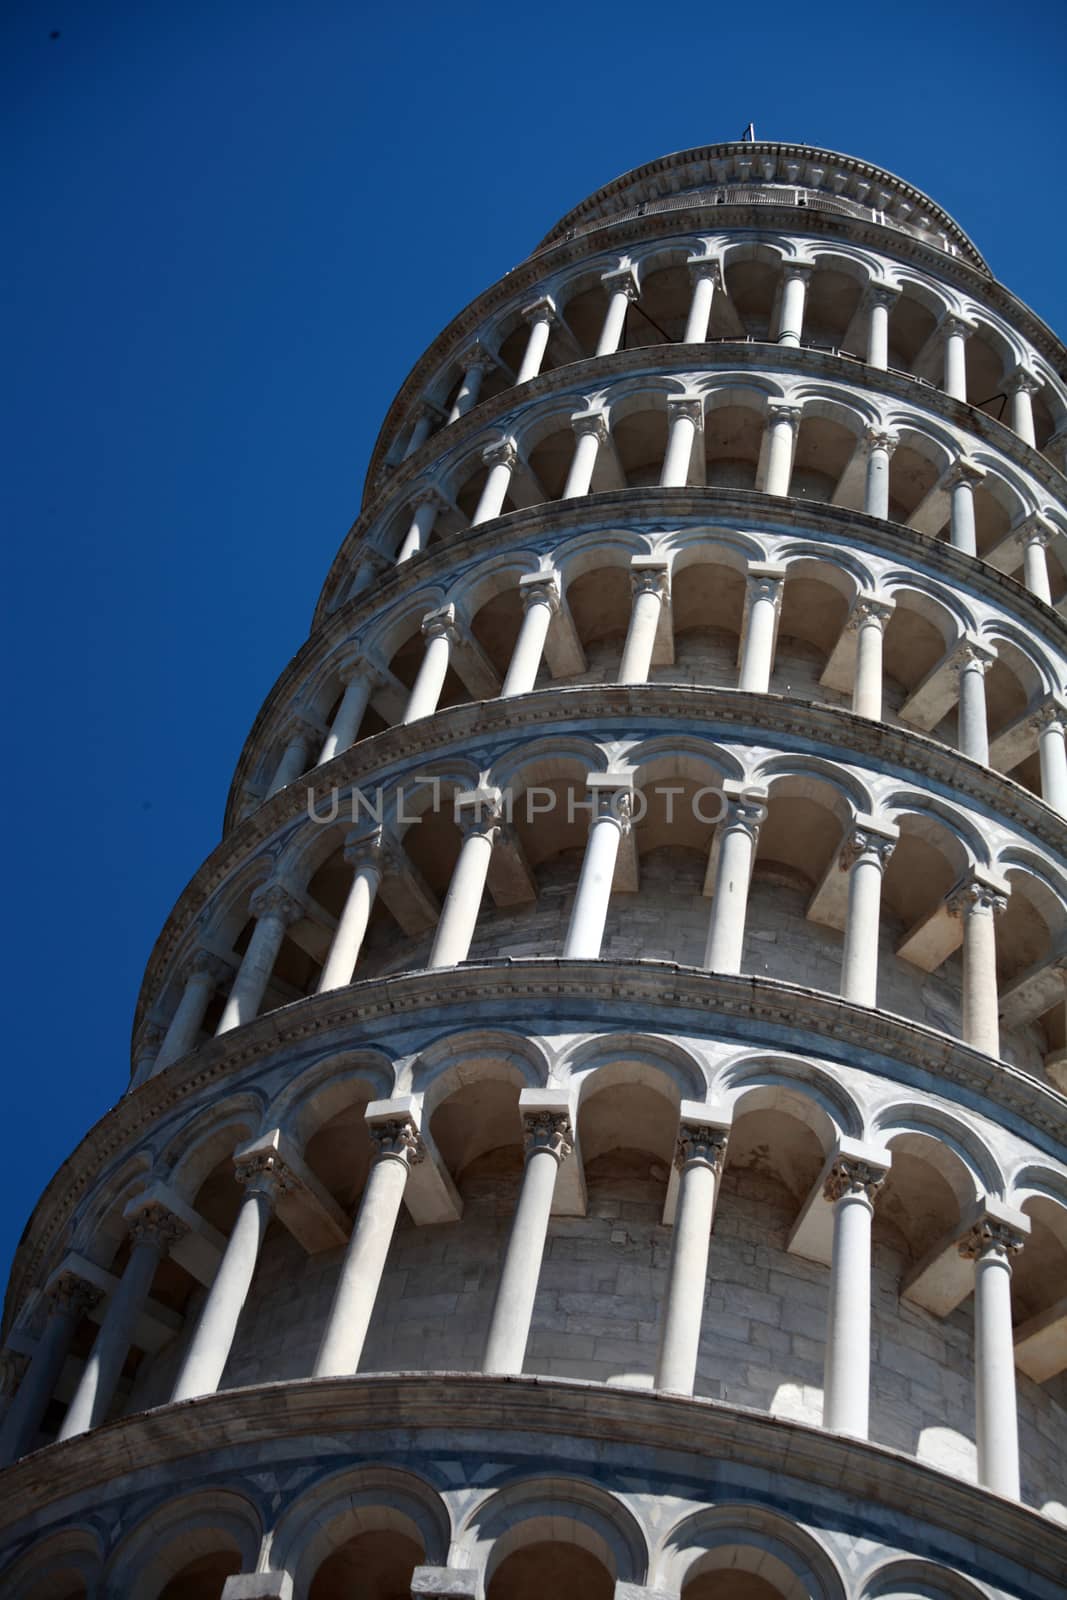 shooting from the bottom of the Leaning Tower of Pisa, Tuscany, Italy